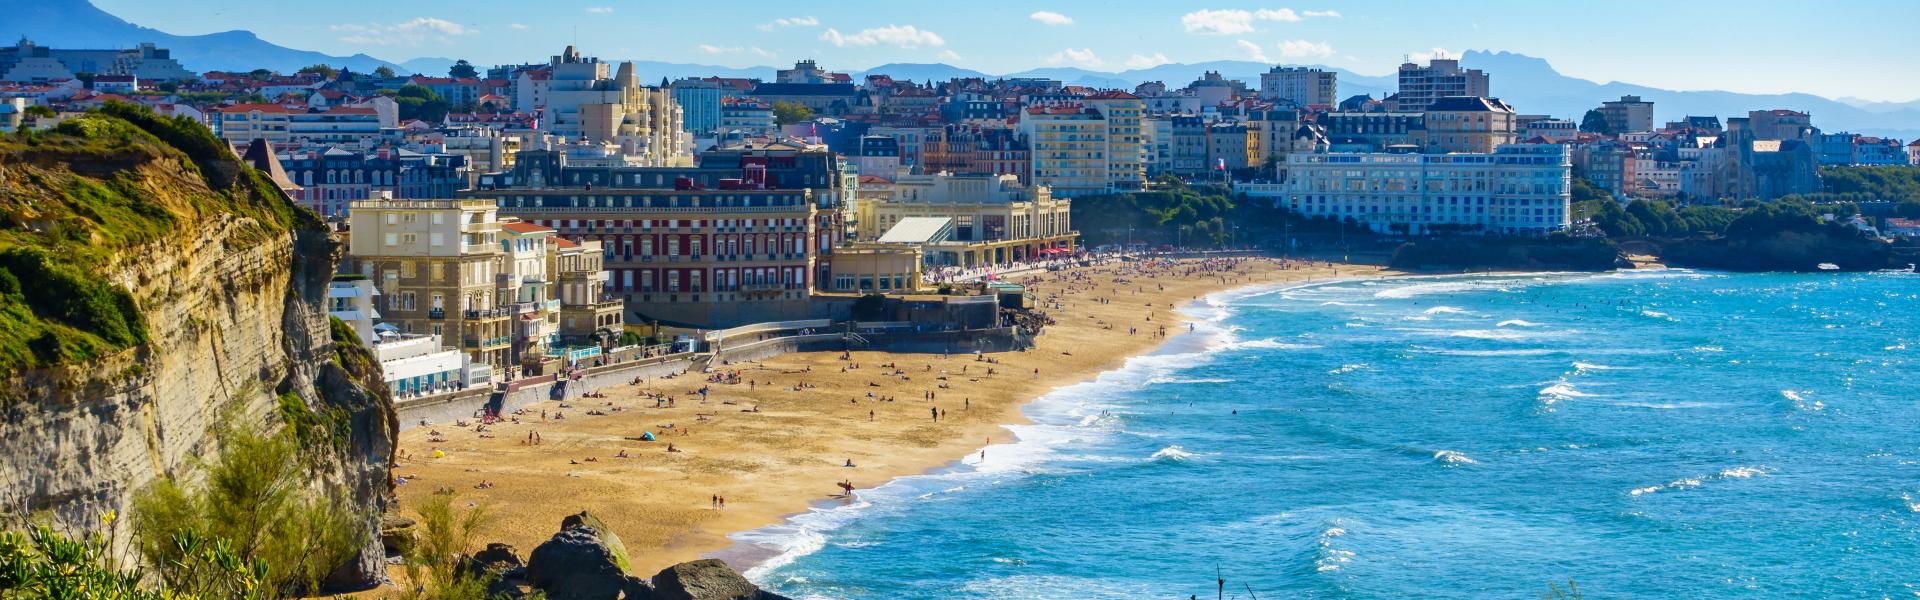 Find the perfect vacation home in Biarritz - Casamundo